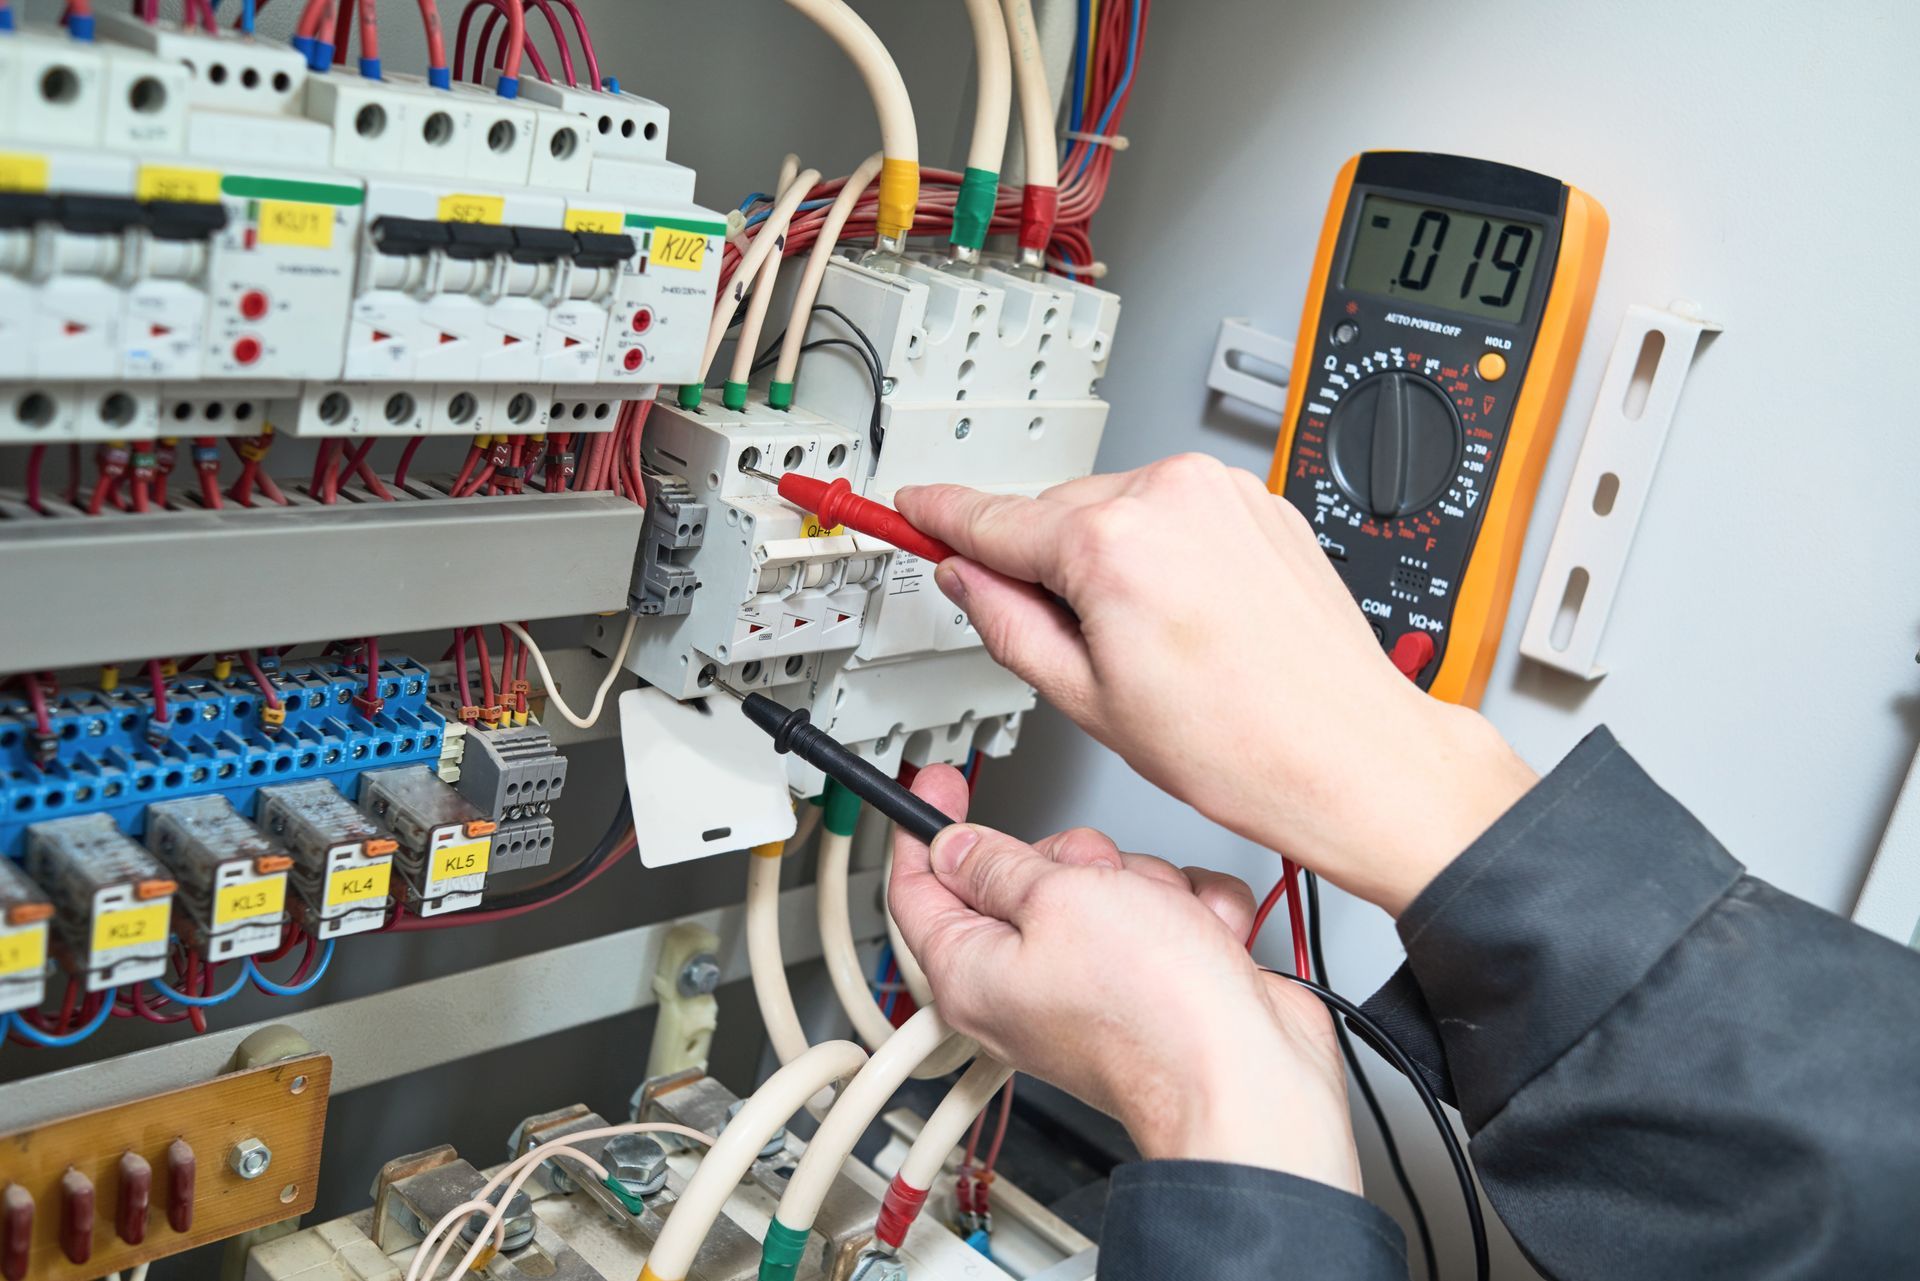 Electrician using a multimeter tester to take measurements in a control panel.